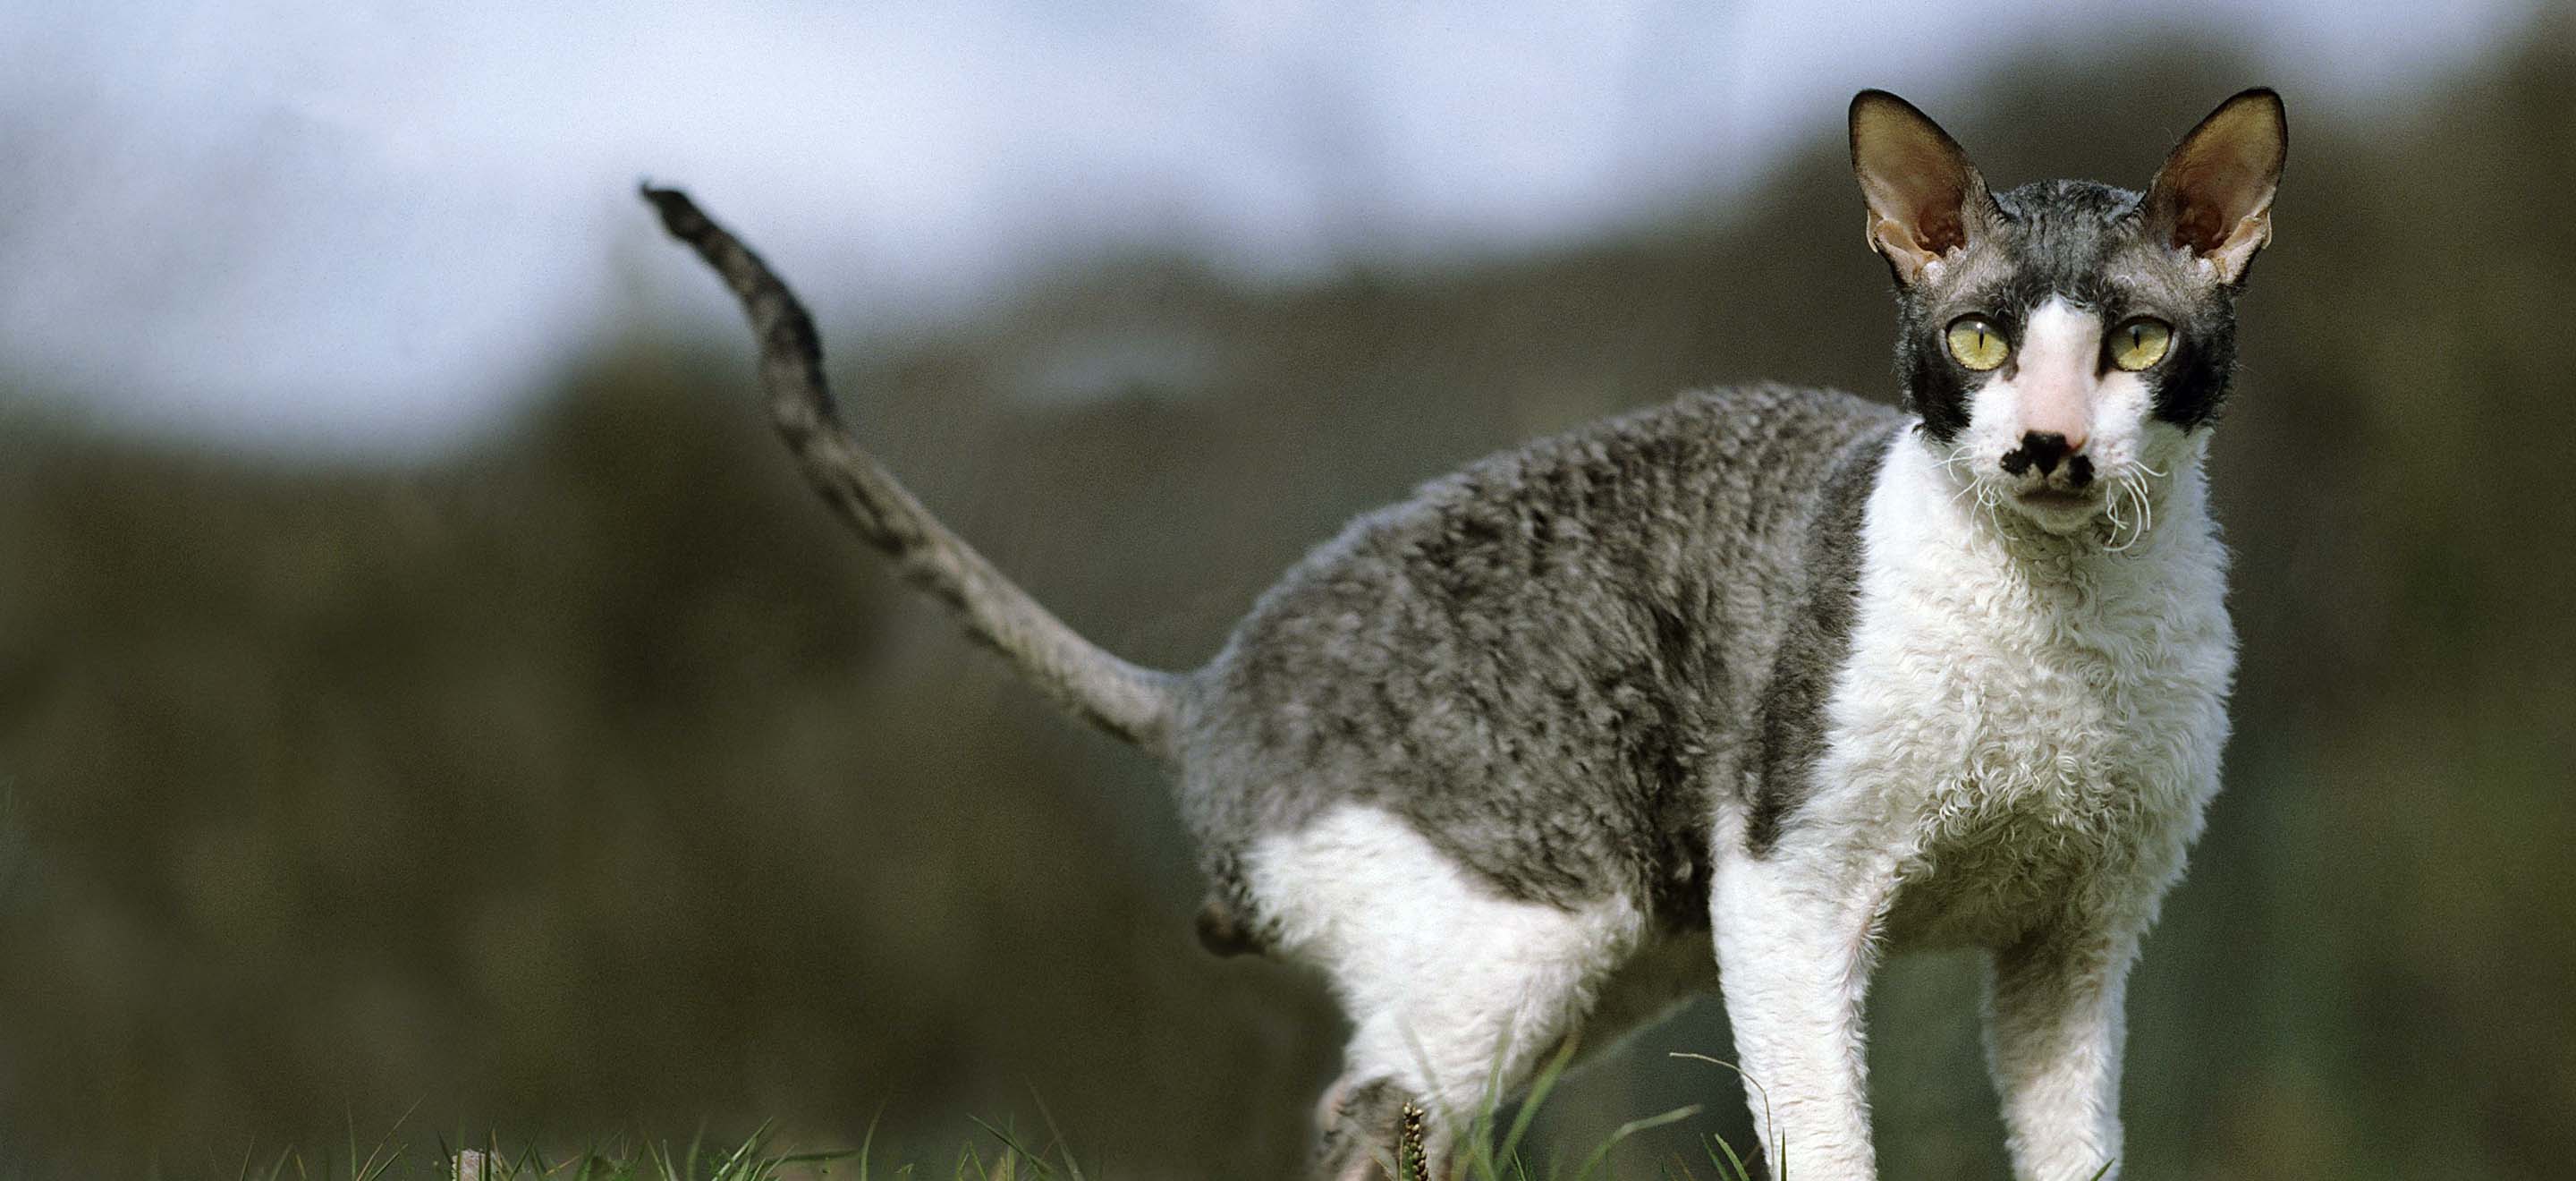 White and gray Cornish Rex cat standing outside image